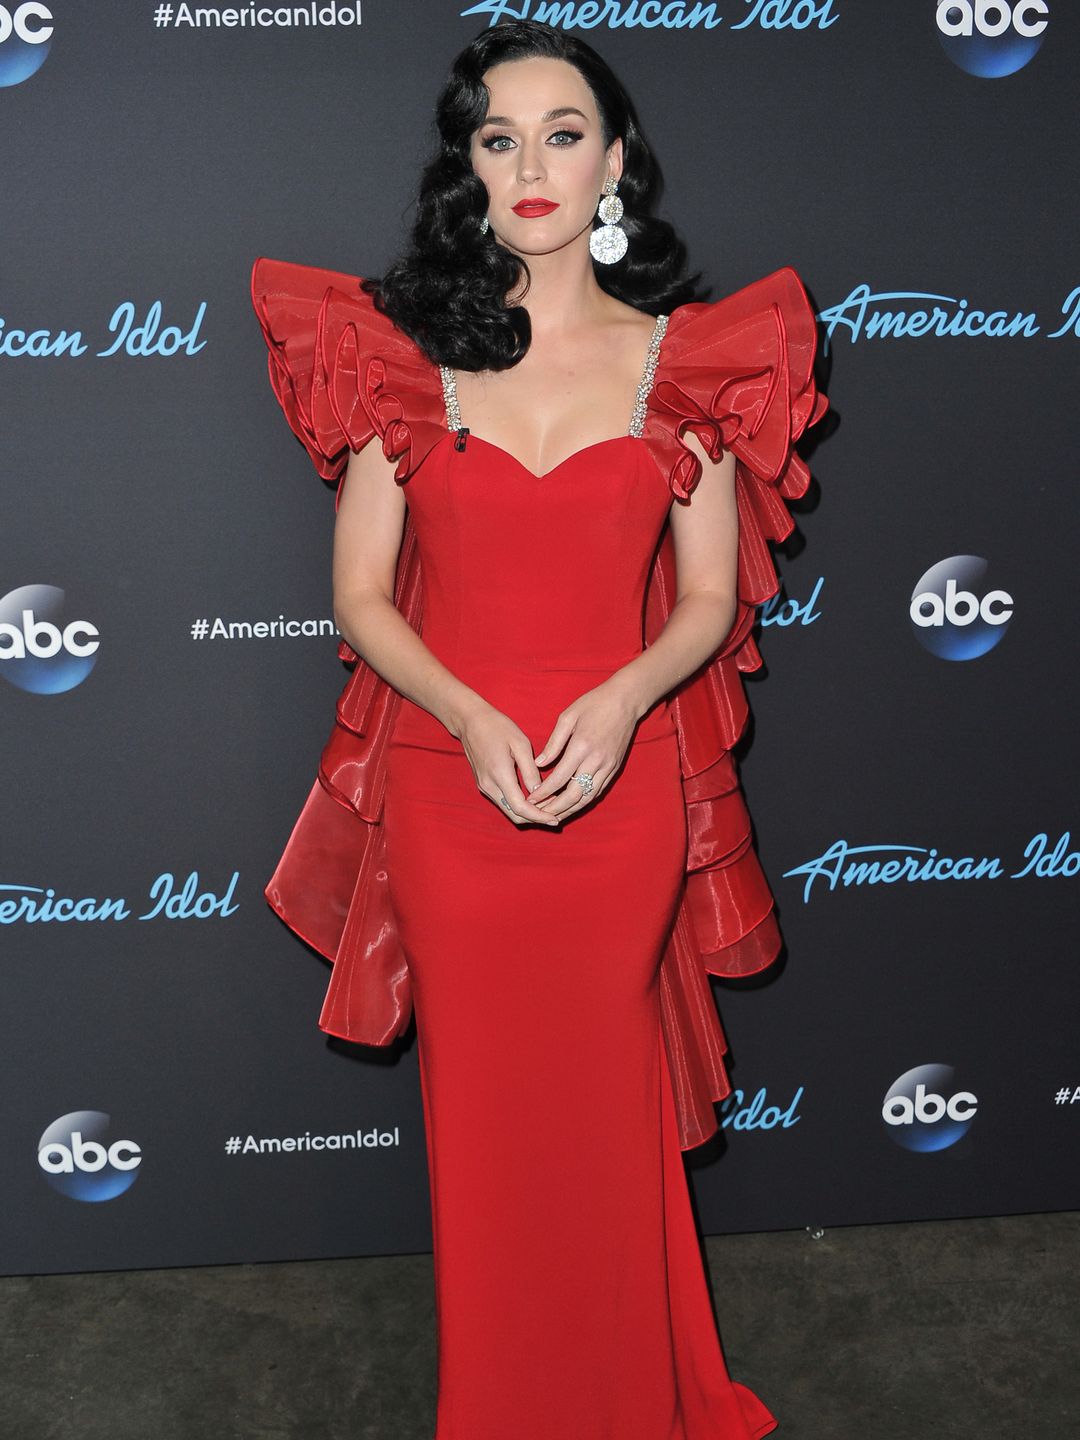 Singer/judge Katy Perry arrives at ABC's "American Idol" show on May 6, 2018 in Los Angeles, California.